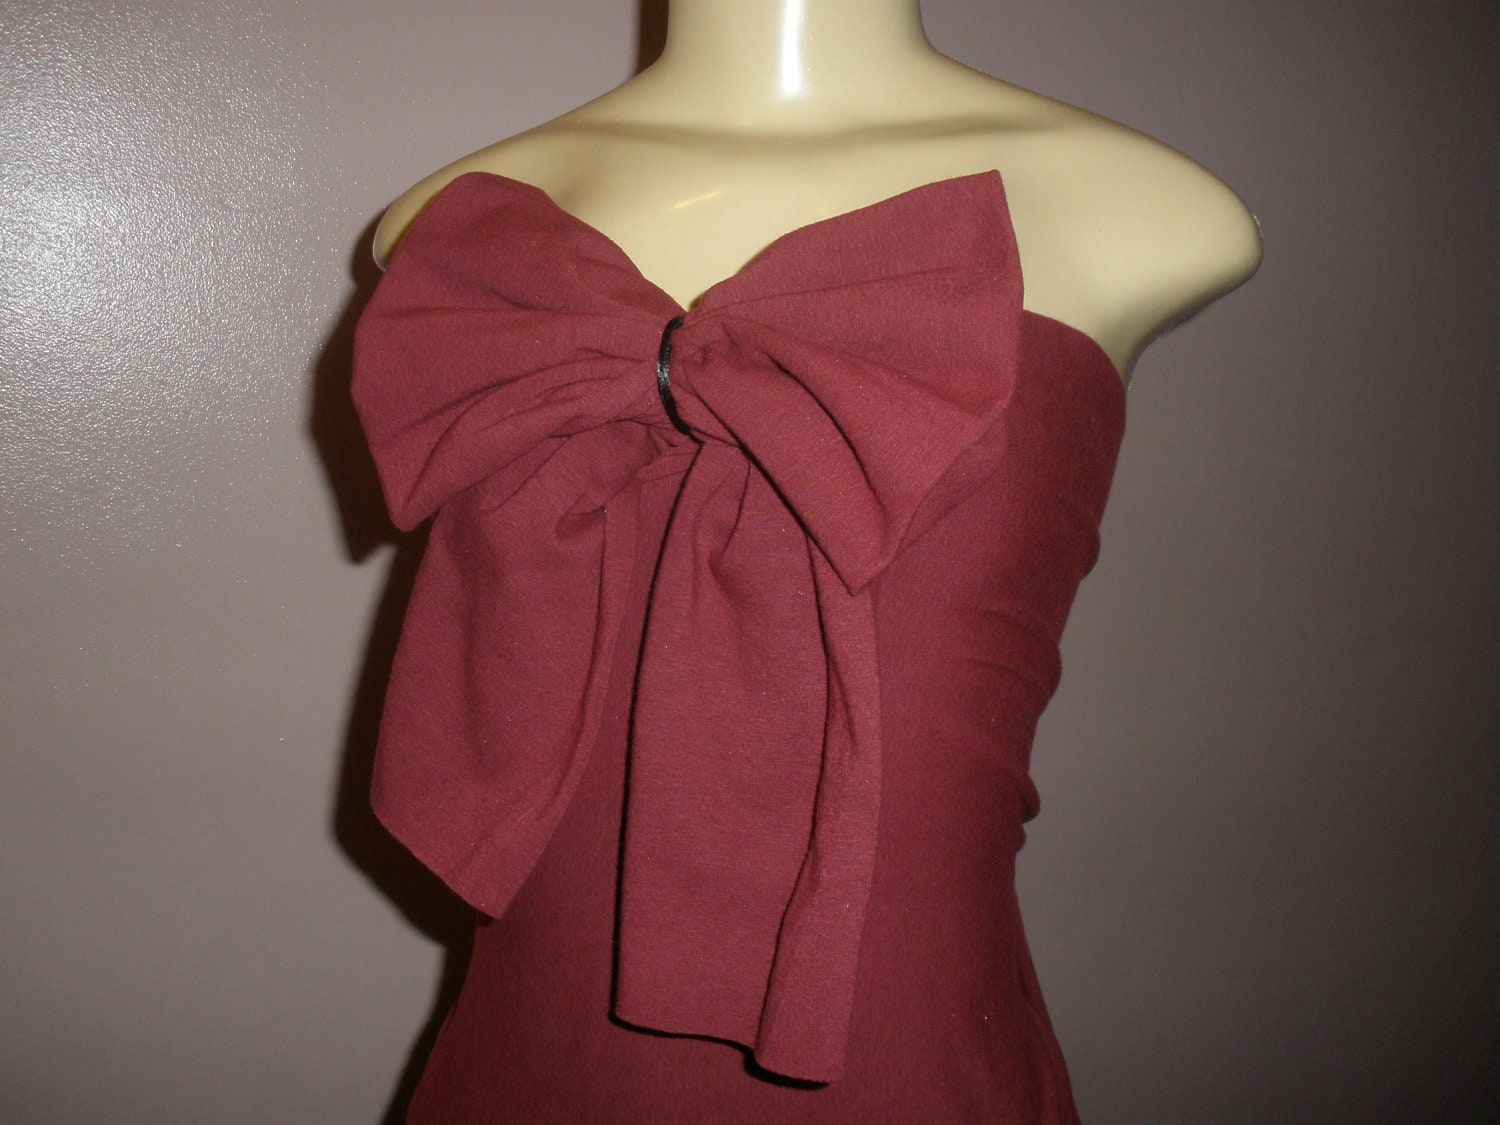 24 Hour Reserve Listing for a Soft Dark Burgundy Red Halter Top with Bow Being Custom Made for Valerie (This Top In Photo are Just Samples)